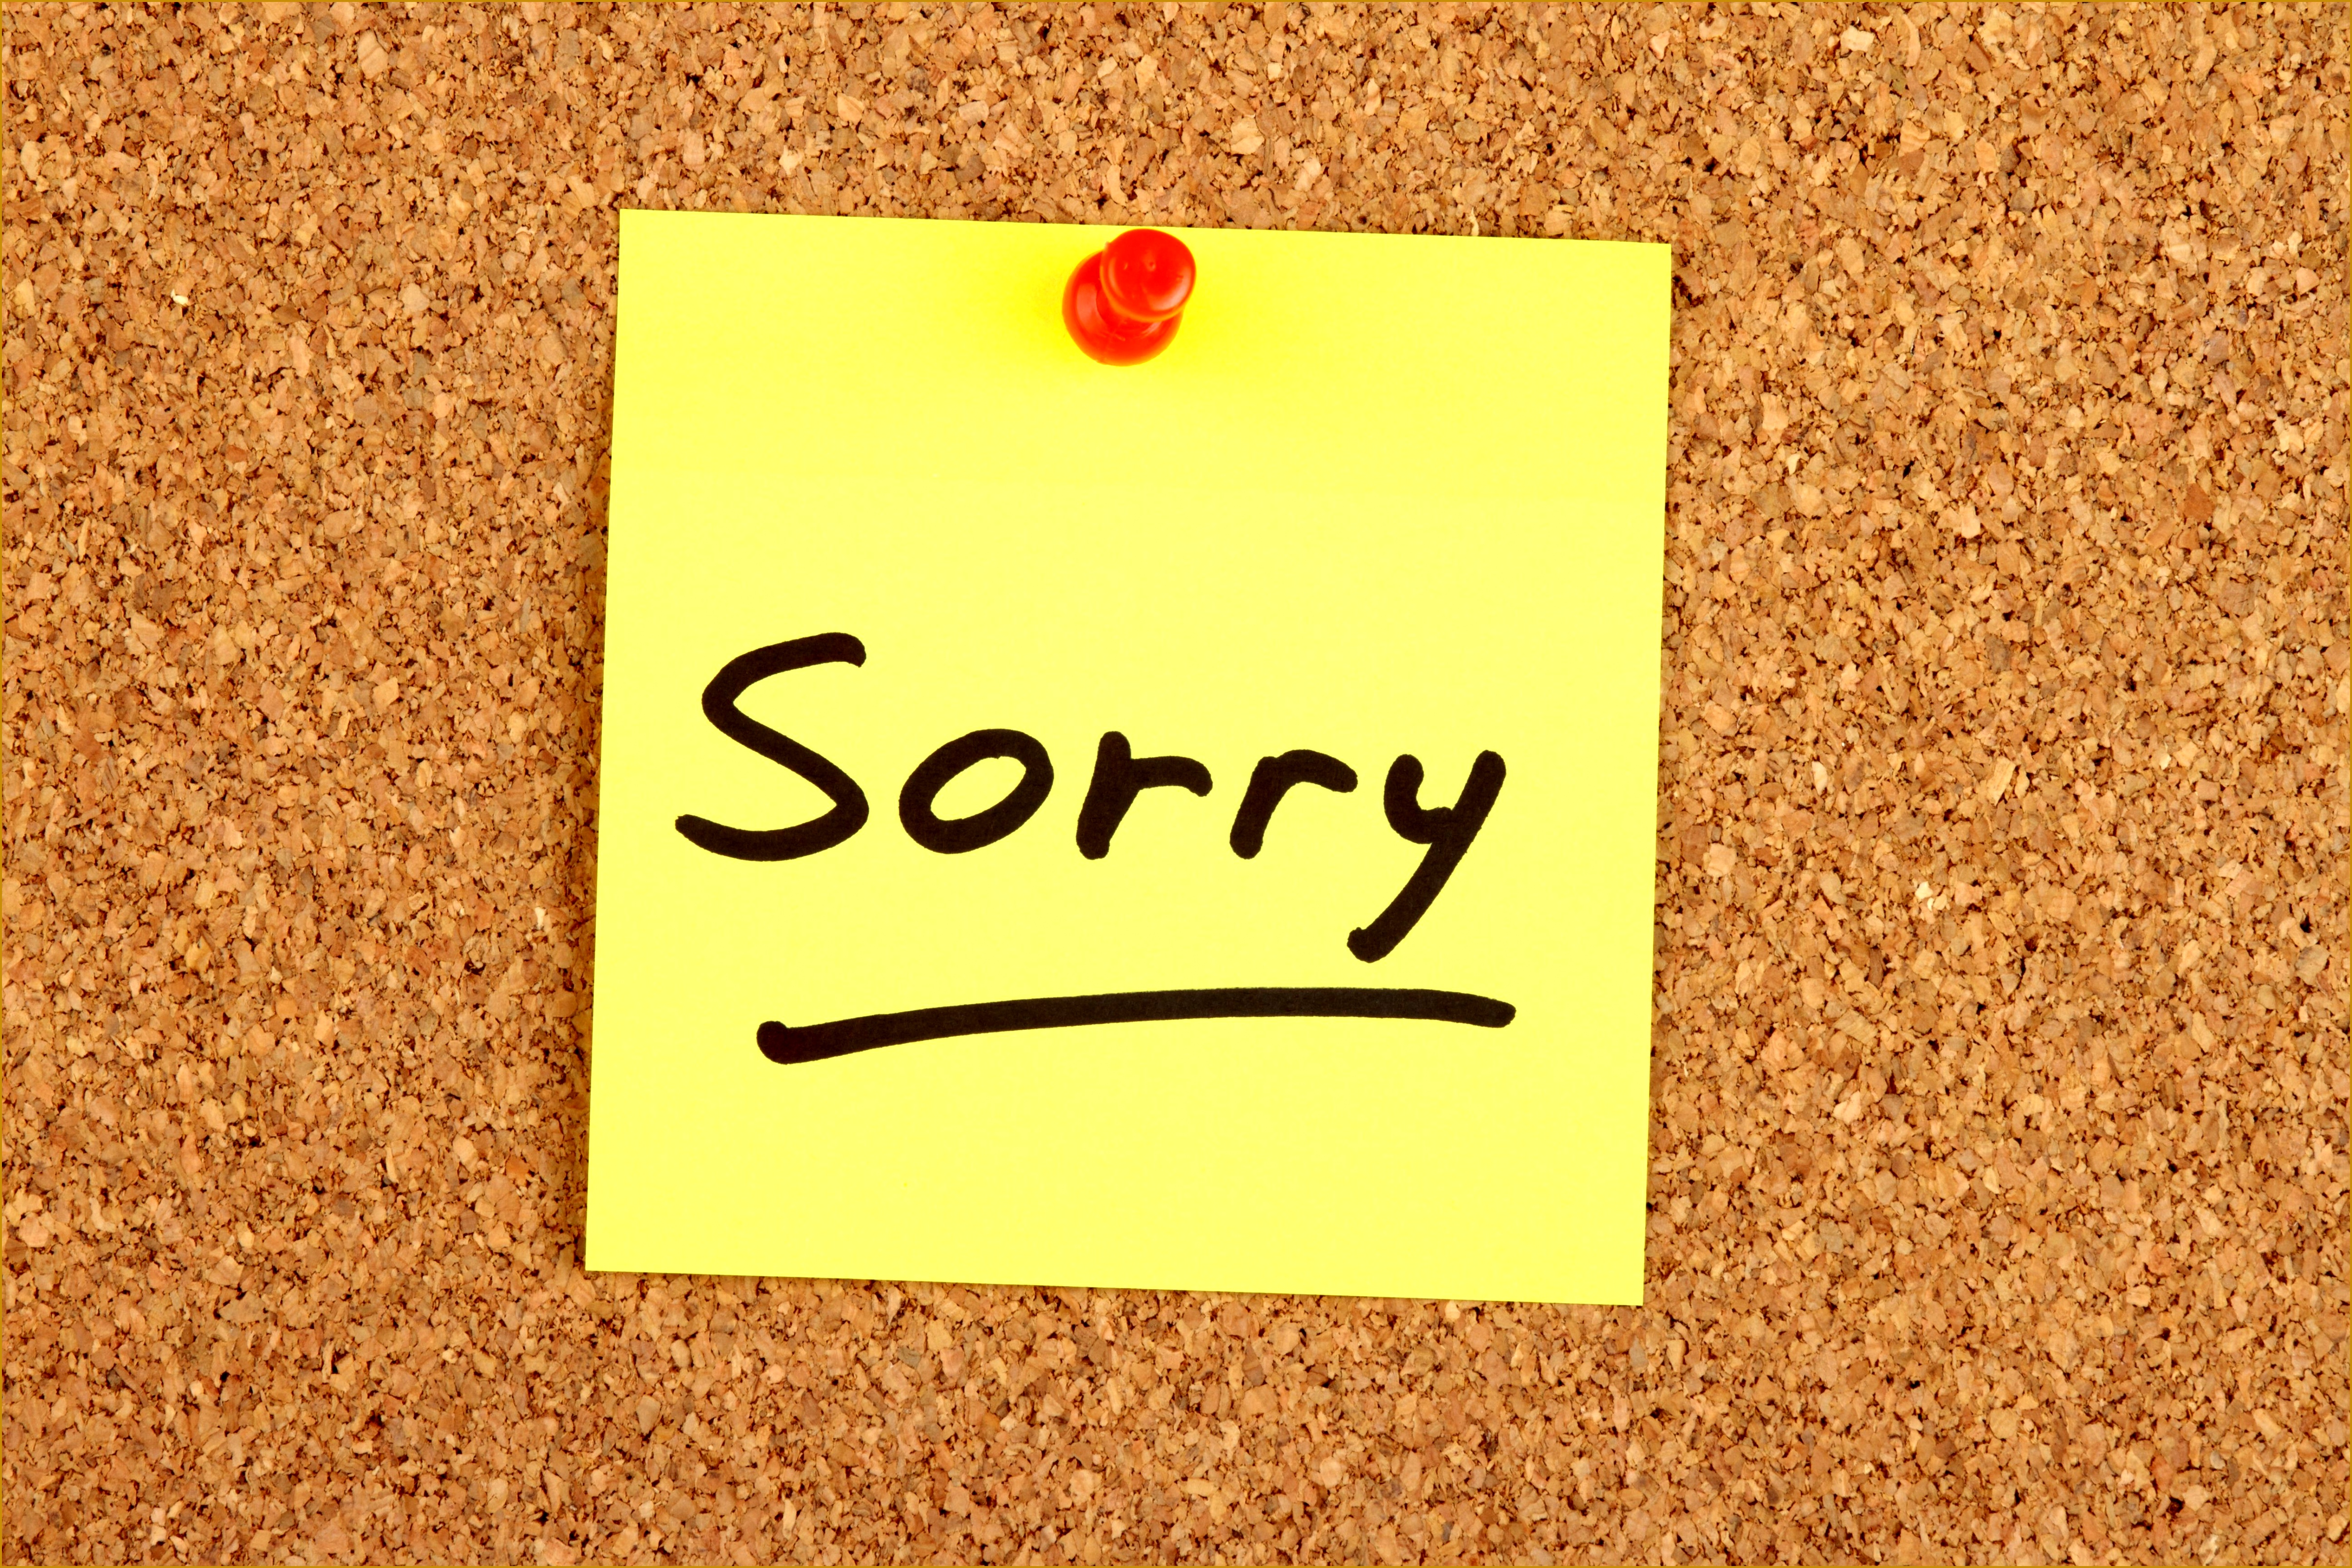 Sorry written on an Adhesive Note 32144821